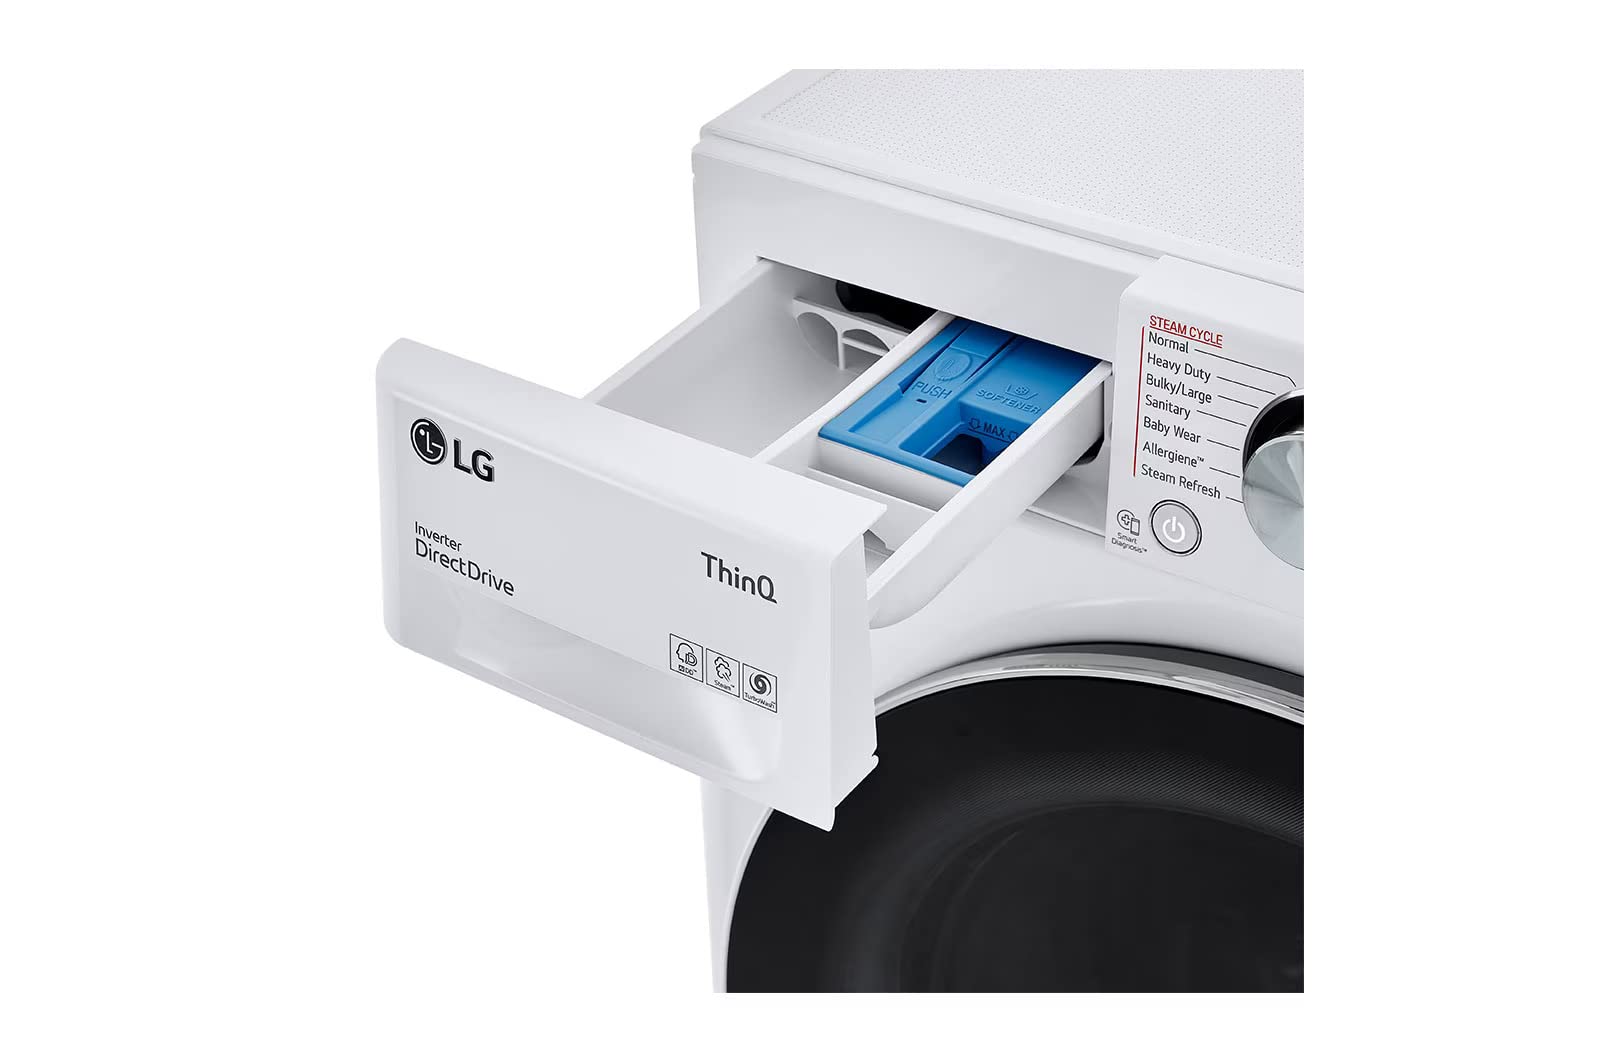 LG WM3555HWA 24 Inch Smart All In One Washer/Dryer with 2.3 cu. ft. Capacity, Wi-Fi Enabled, 14 Wash Cycles, 1400 RPM, Ventless, NeveRust Stainless Steel Drum, Quiet Operation, TrueBalance, Sensor Dry in White